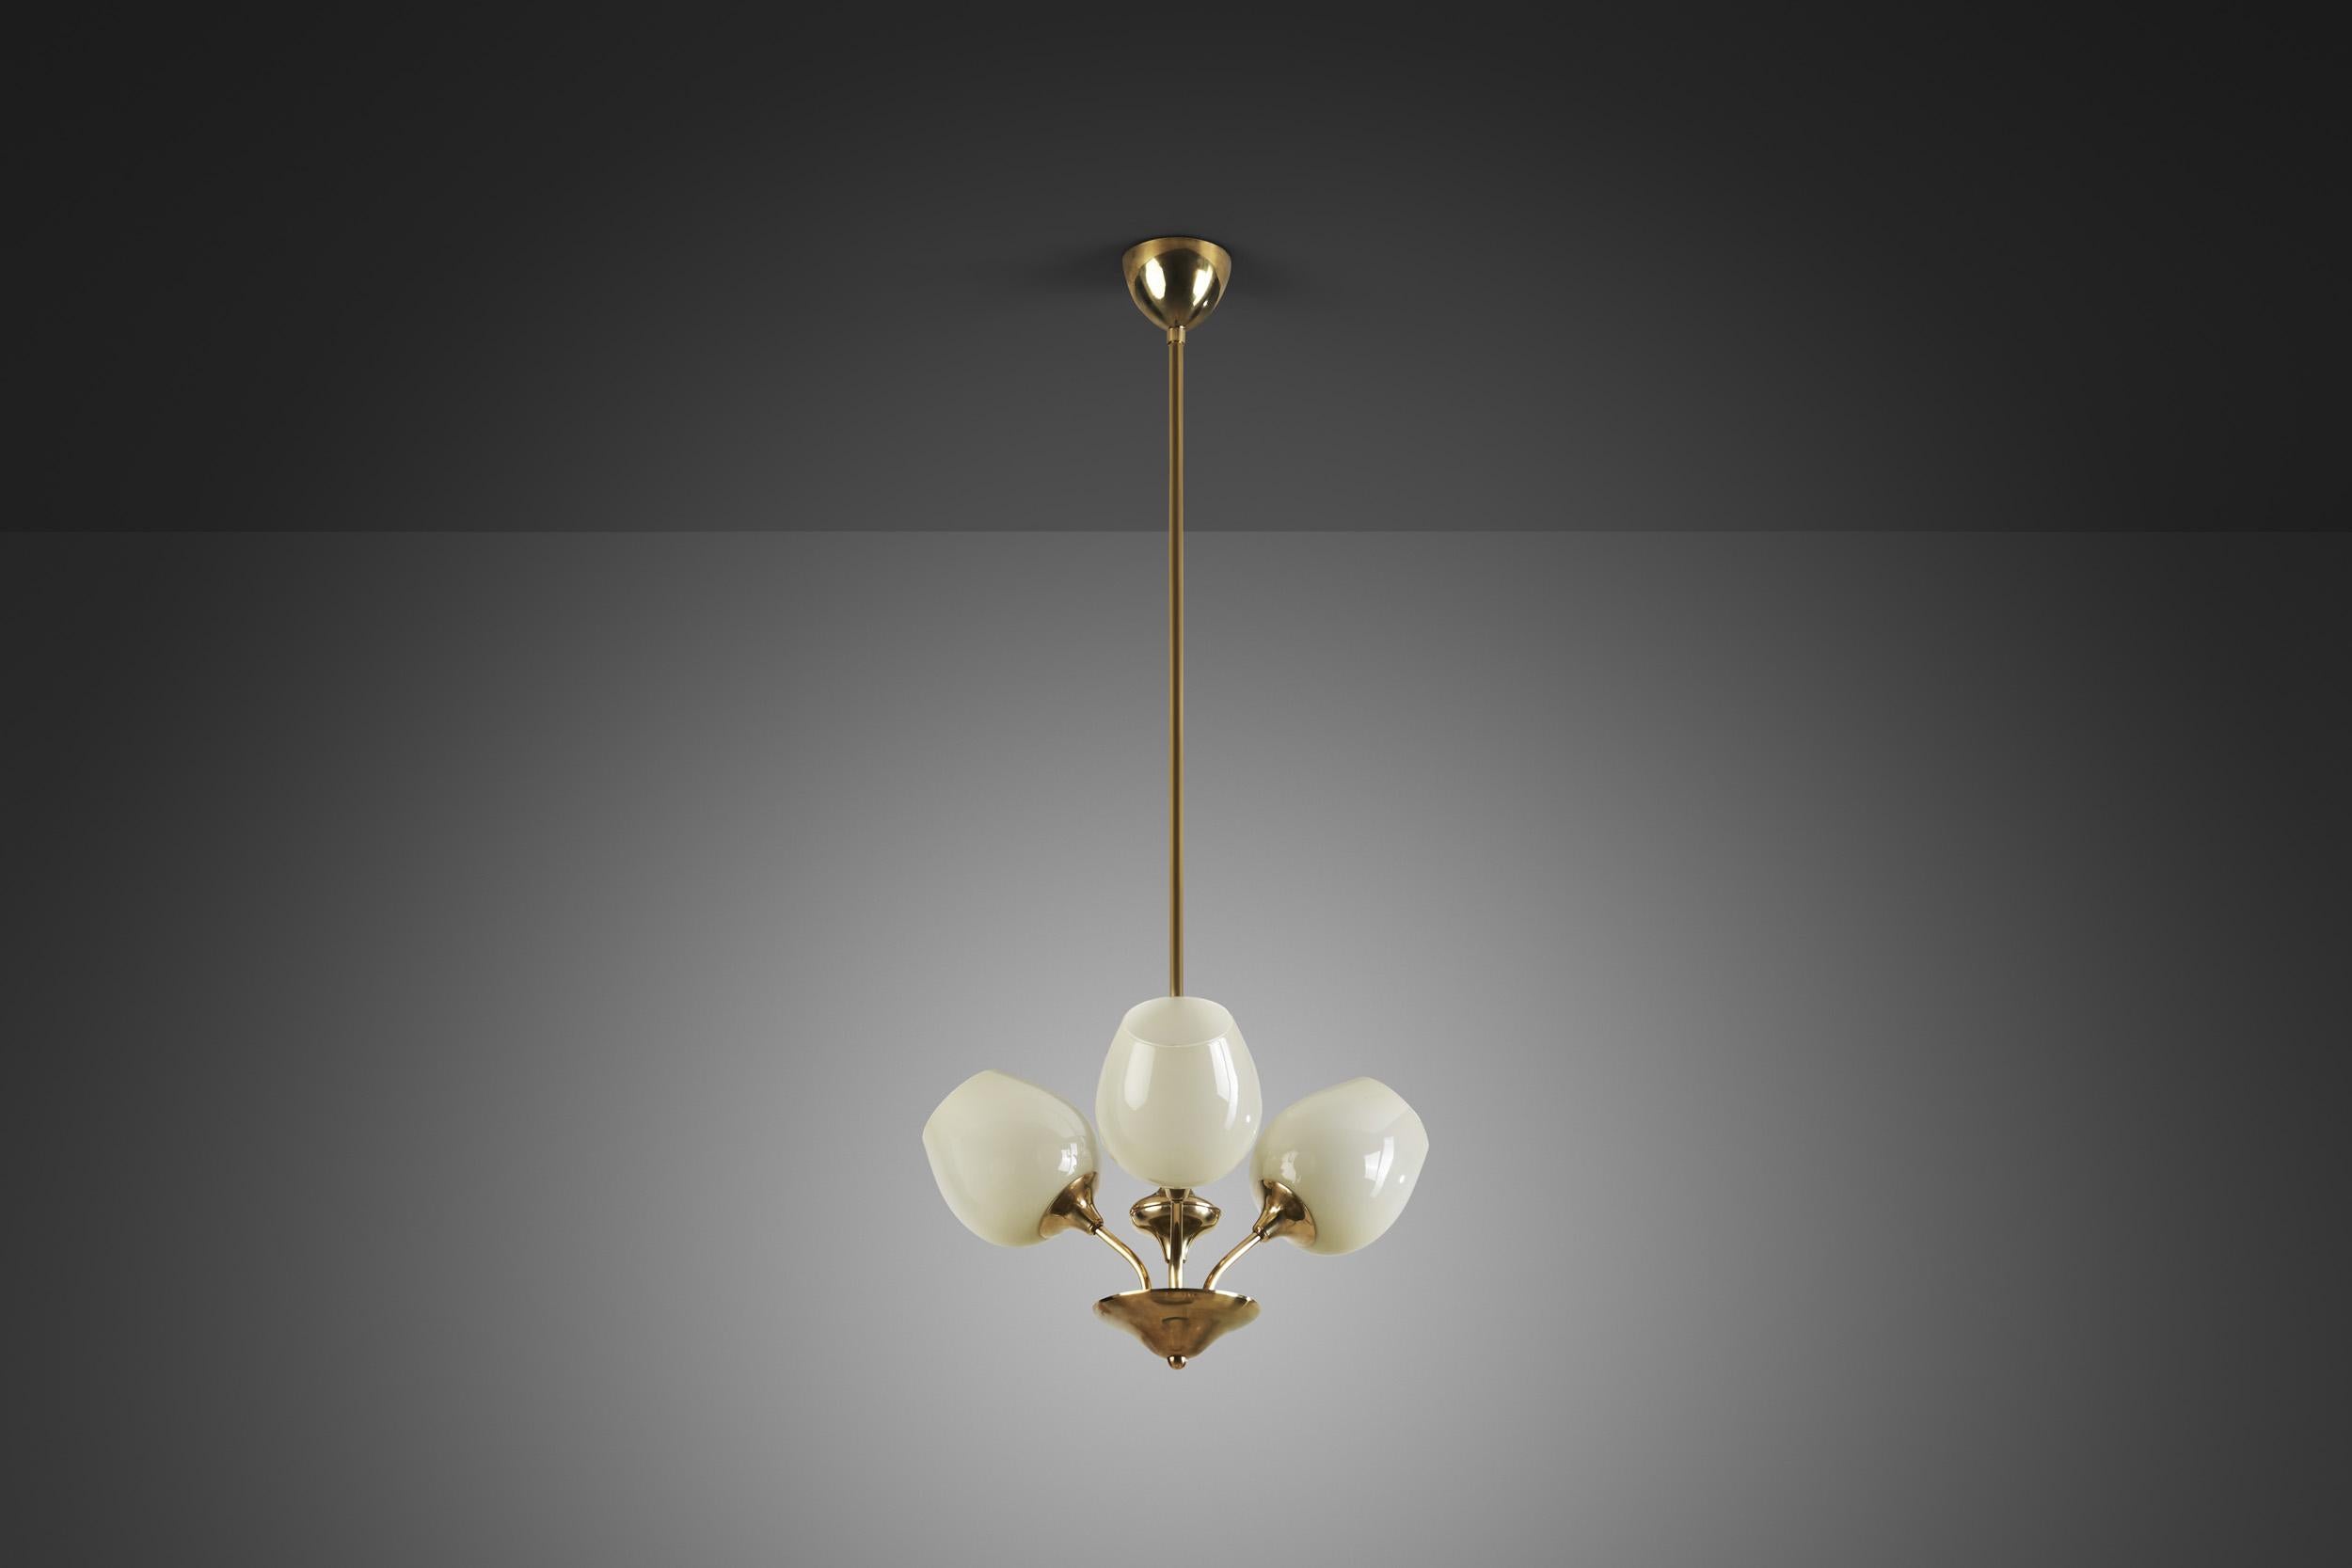 Mid-Century Modern Brass Ceiling Lamp with Opal Shades by Itsu 'Attr.', Finland, ca 1950s For Sale